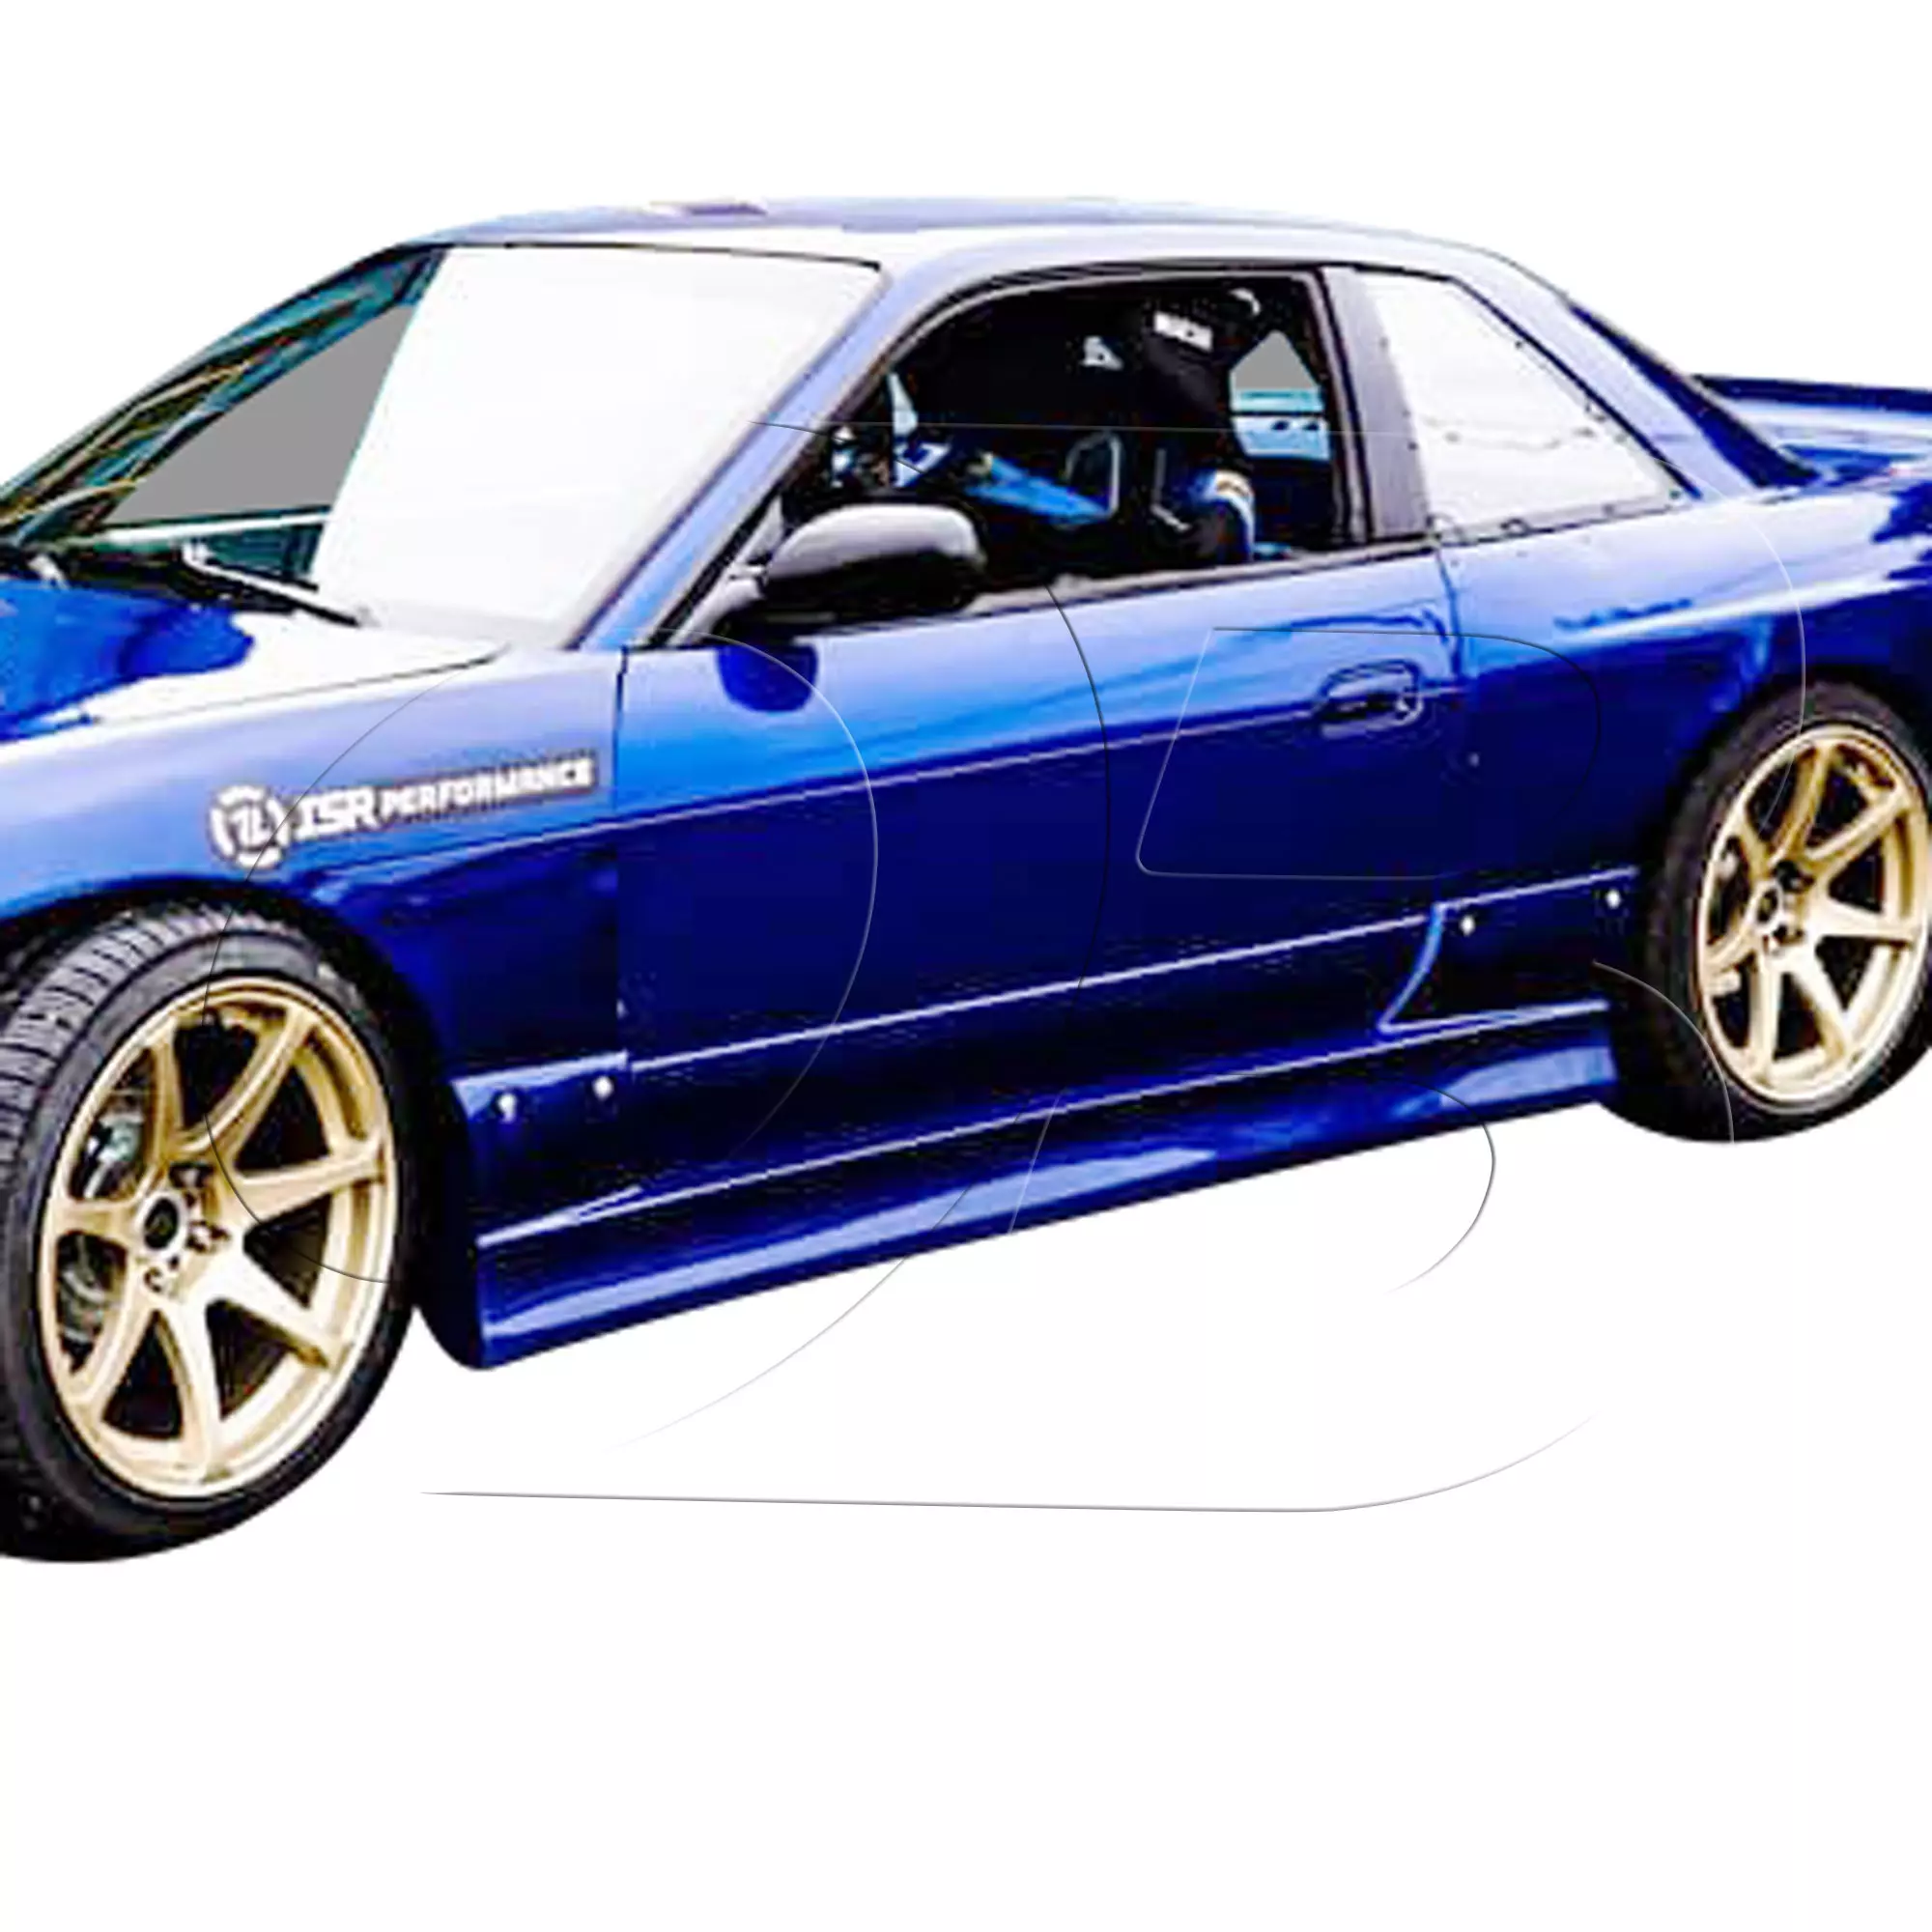 KBD Urethane Bsport2 Style 4pc Full Body Kit > Nissan 240SX 1989-1994 > 2dr Coupe - Image 55